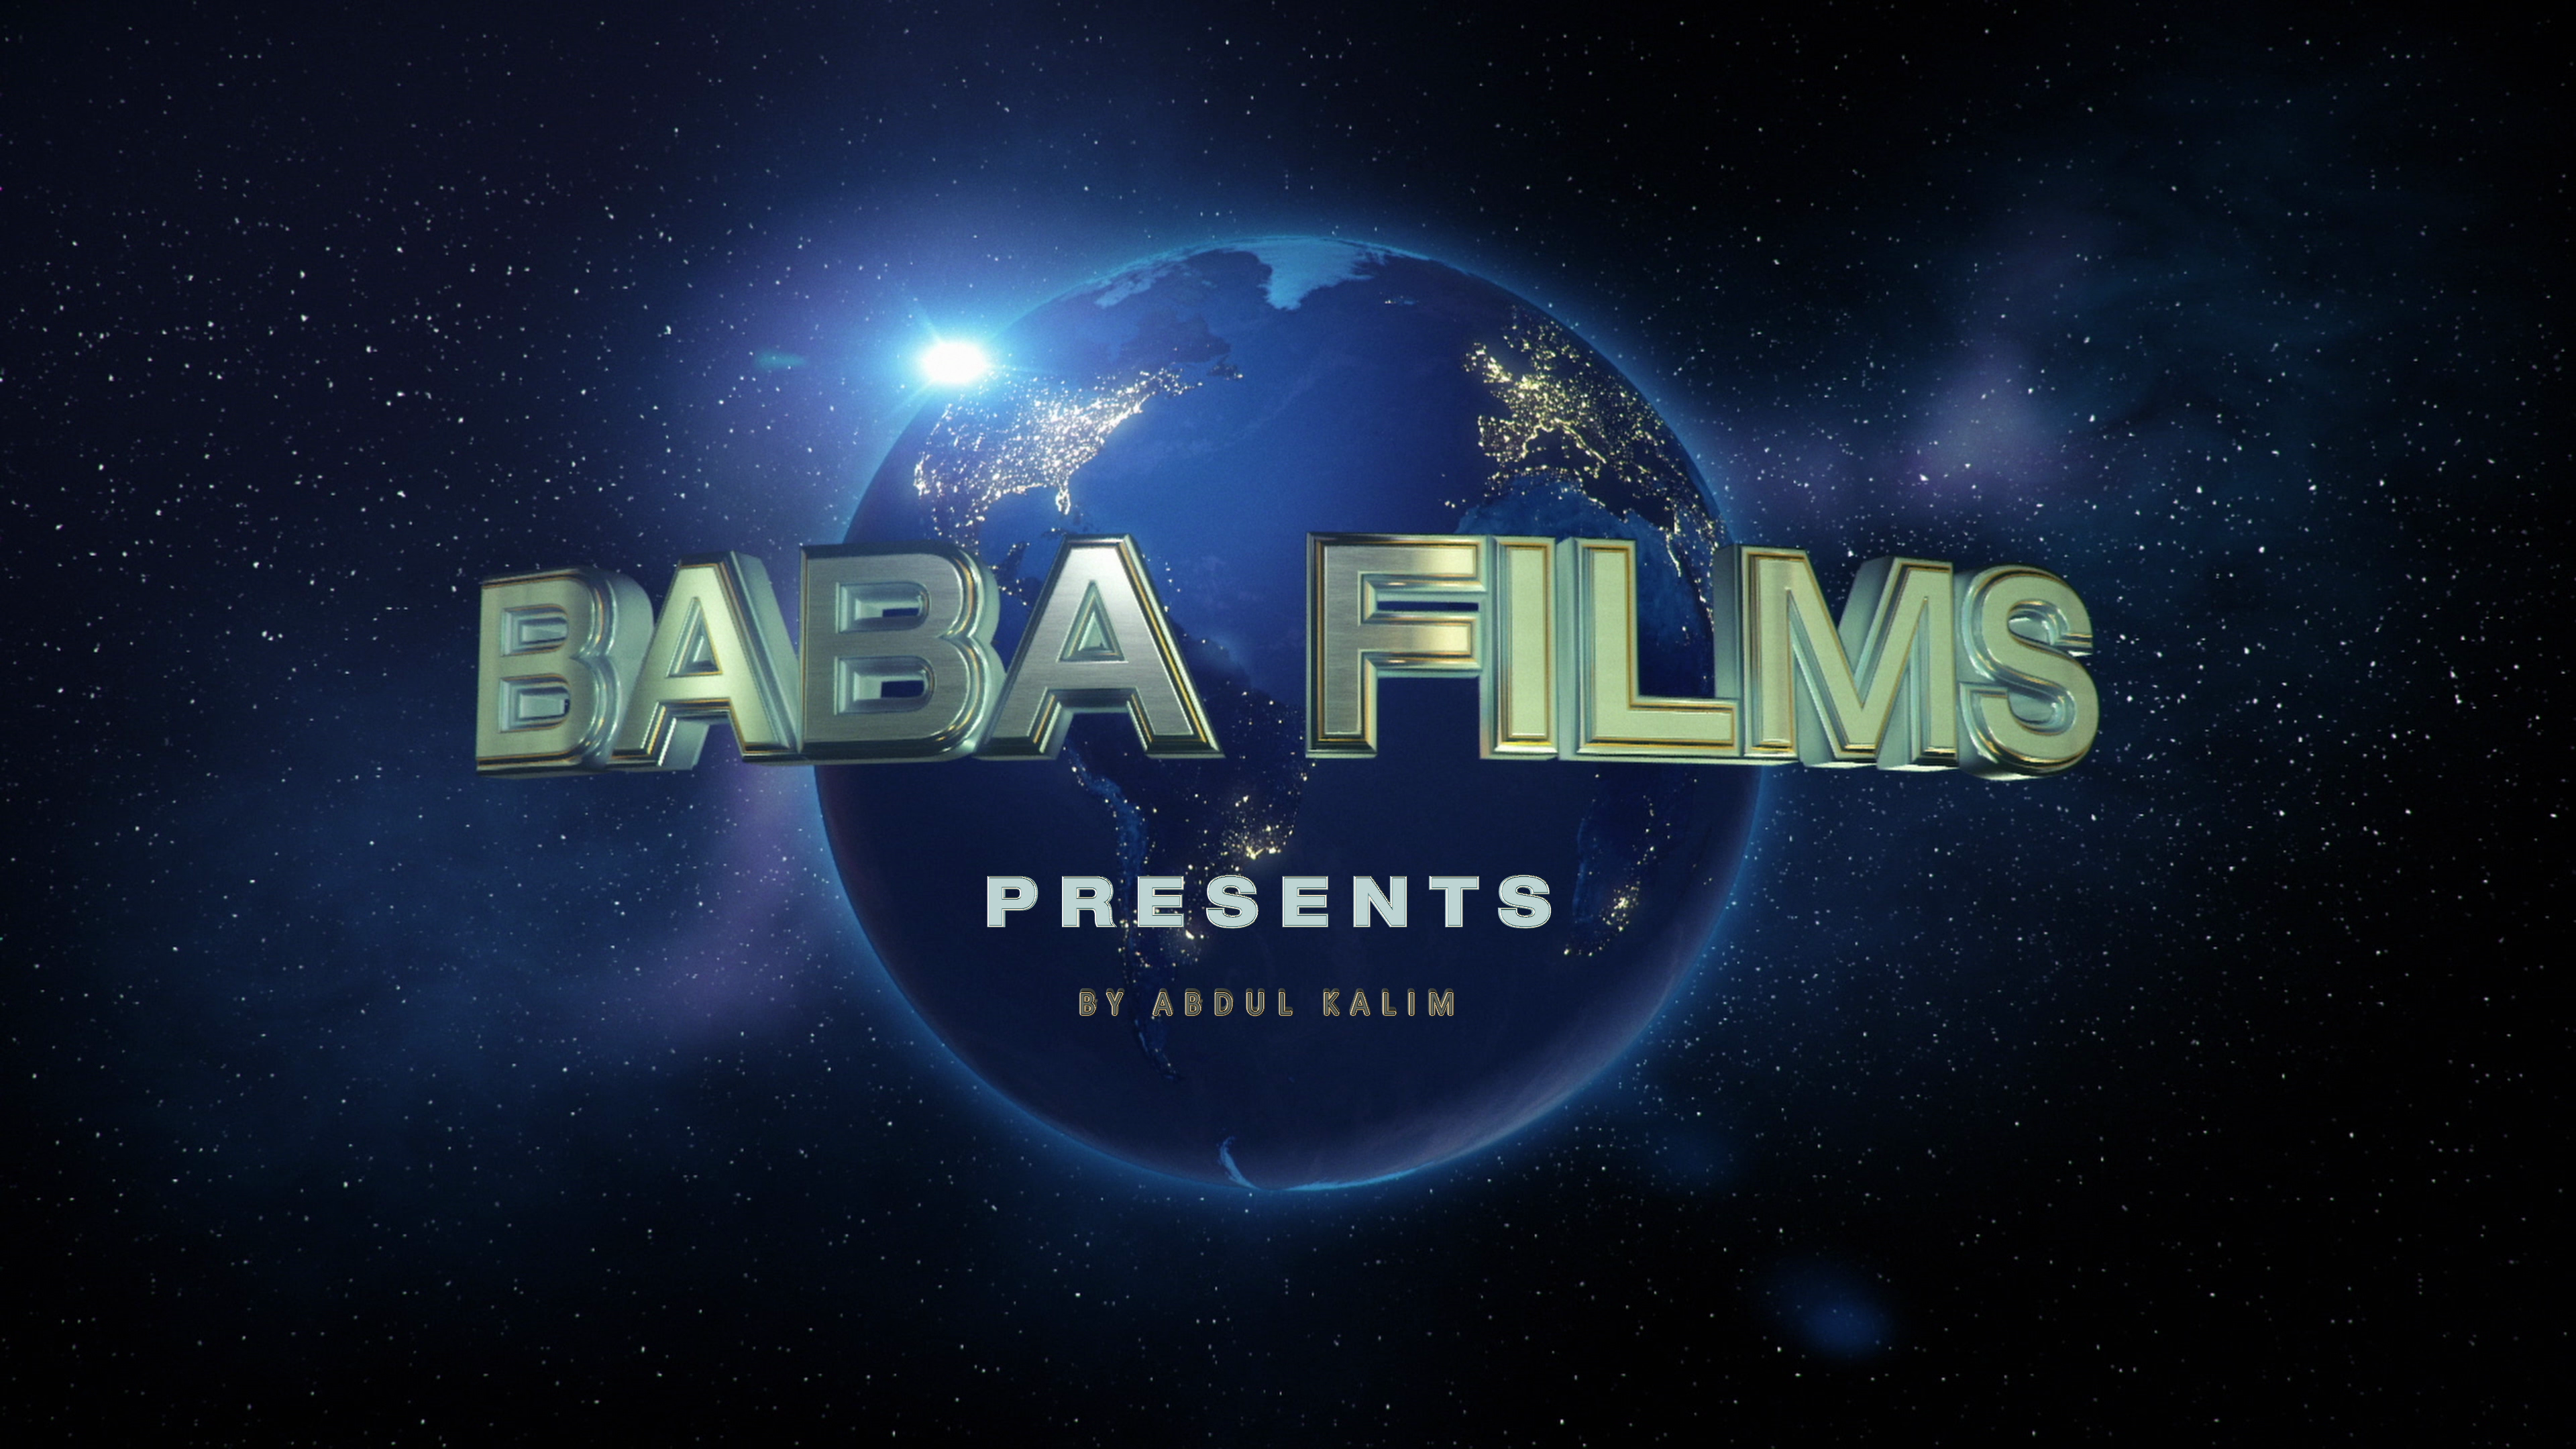 BABA FILMS